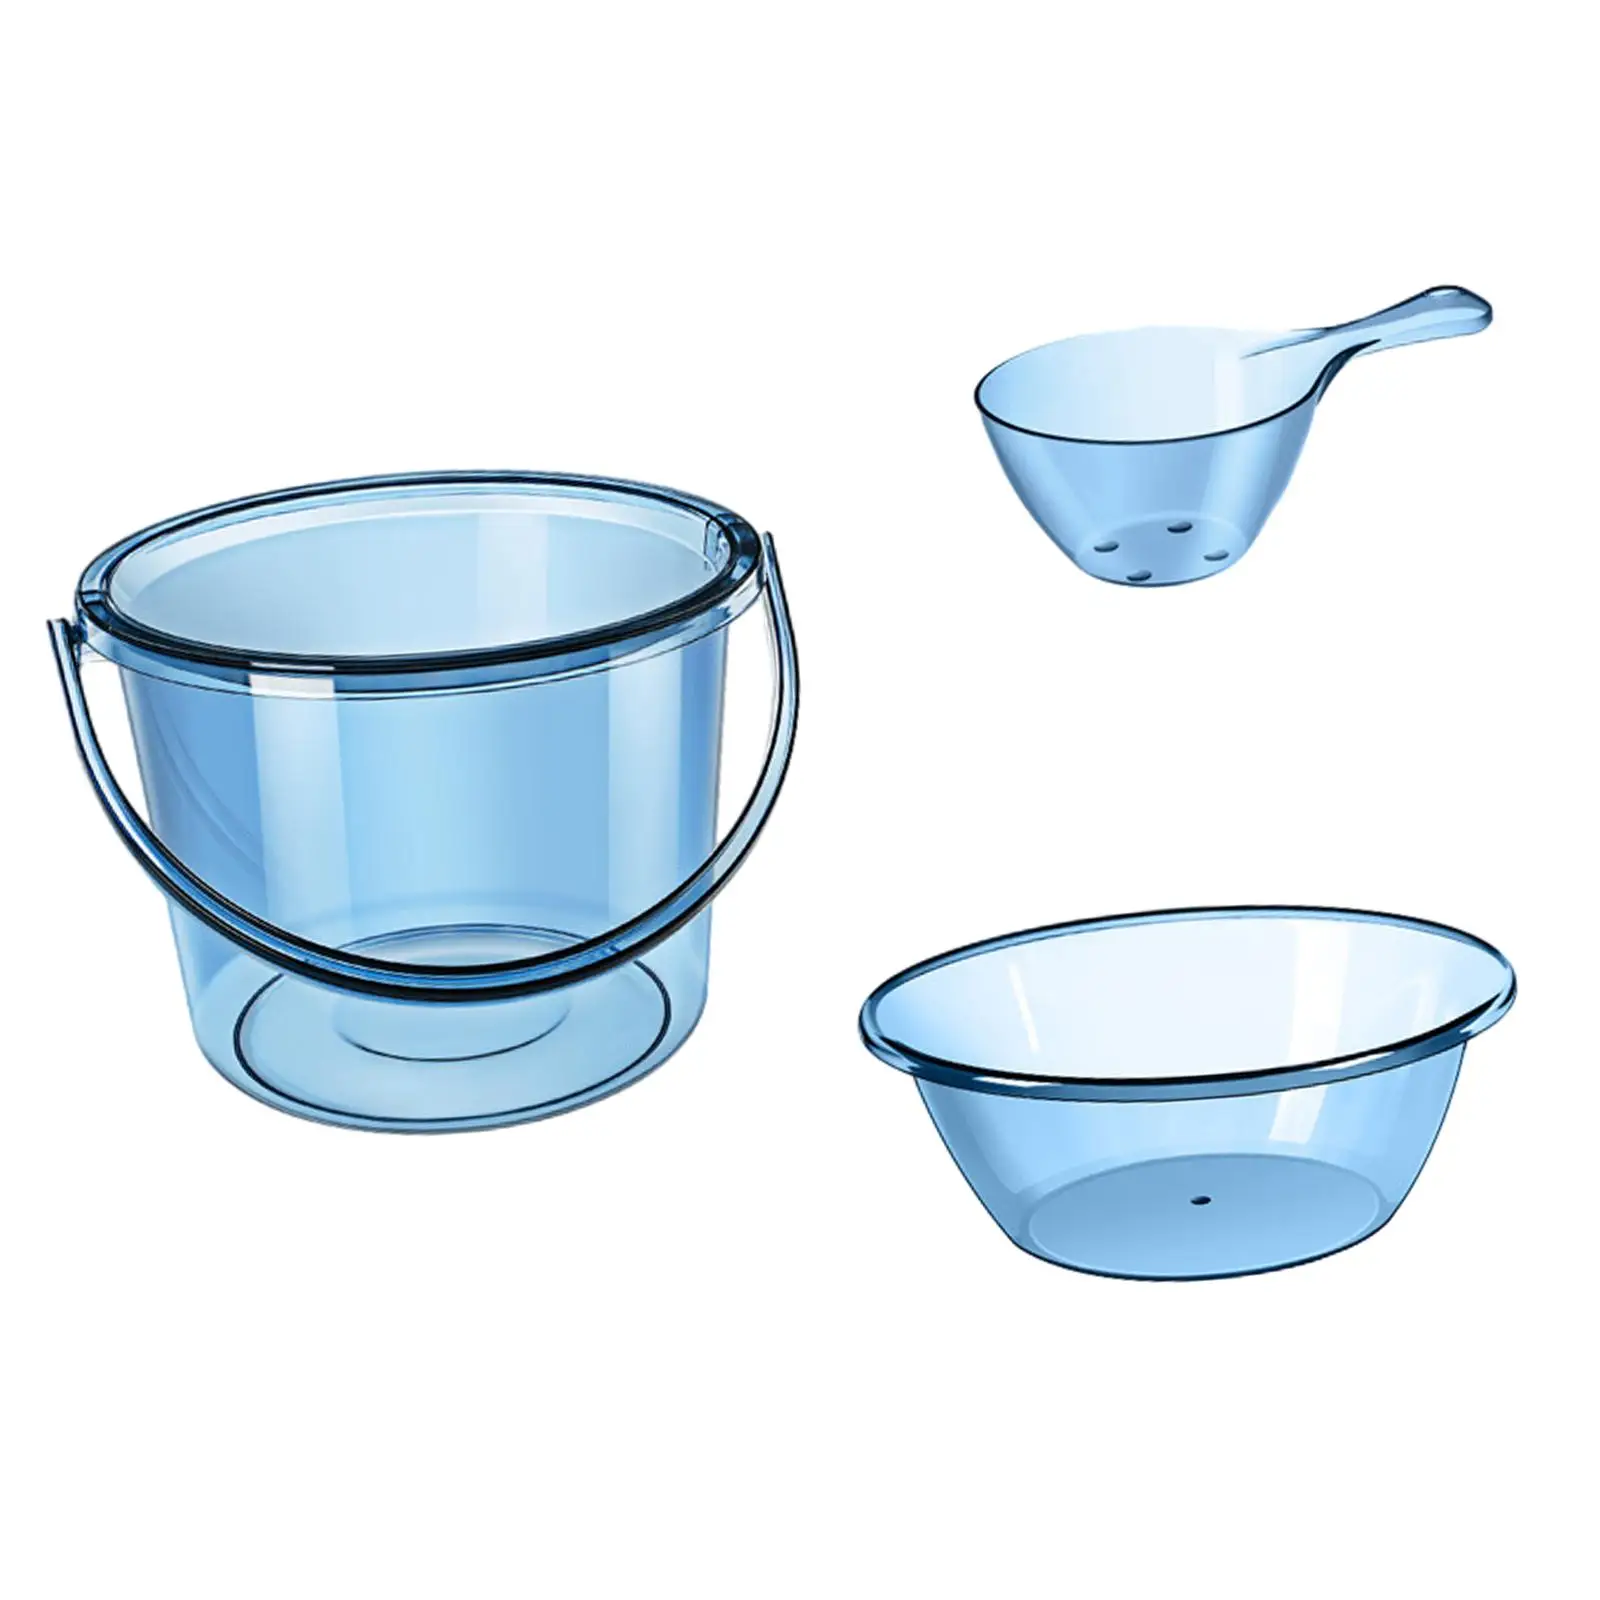 Water Bucket Set Water Pail with Basin and Spoon Bathing Household Bucket for Car Washing Outdoor Dormitory Kitchen Garden